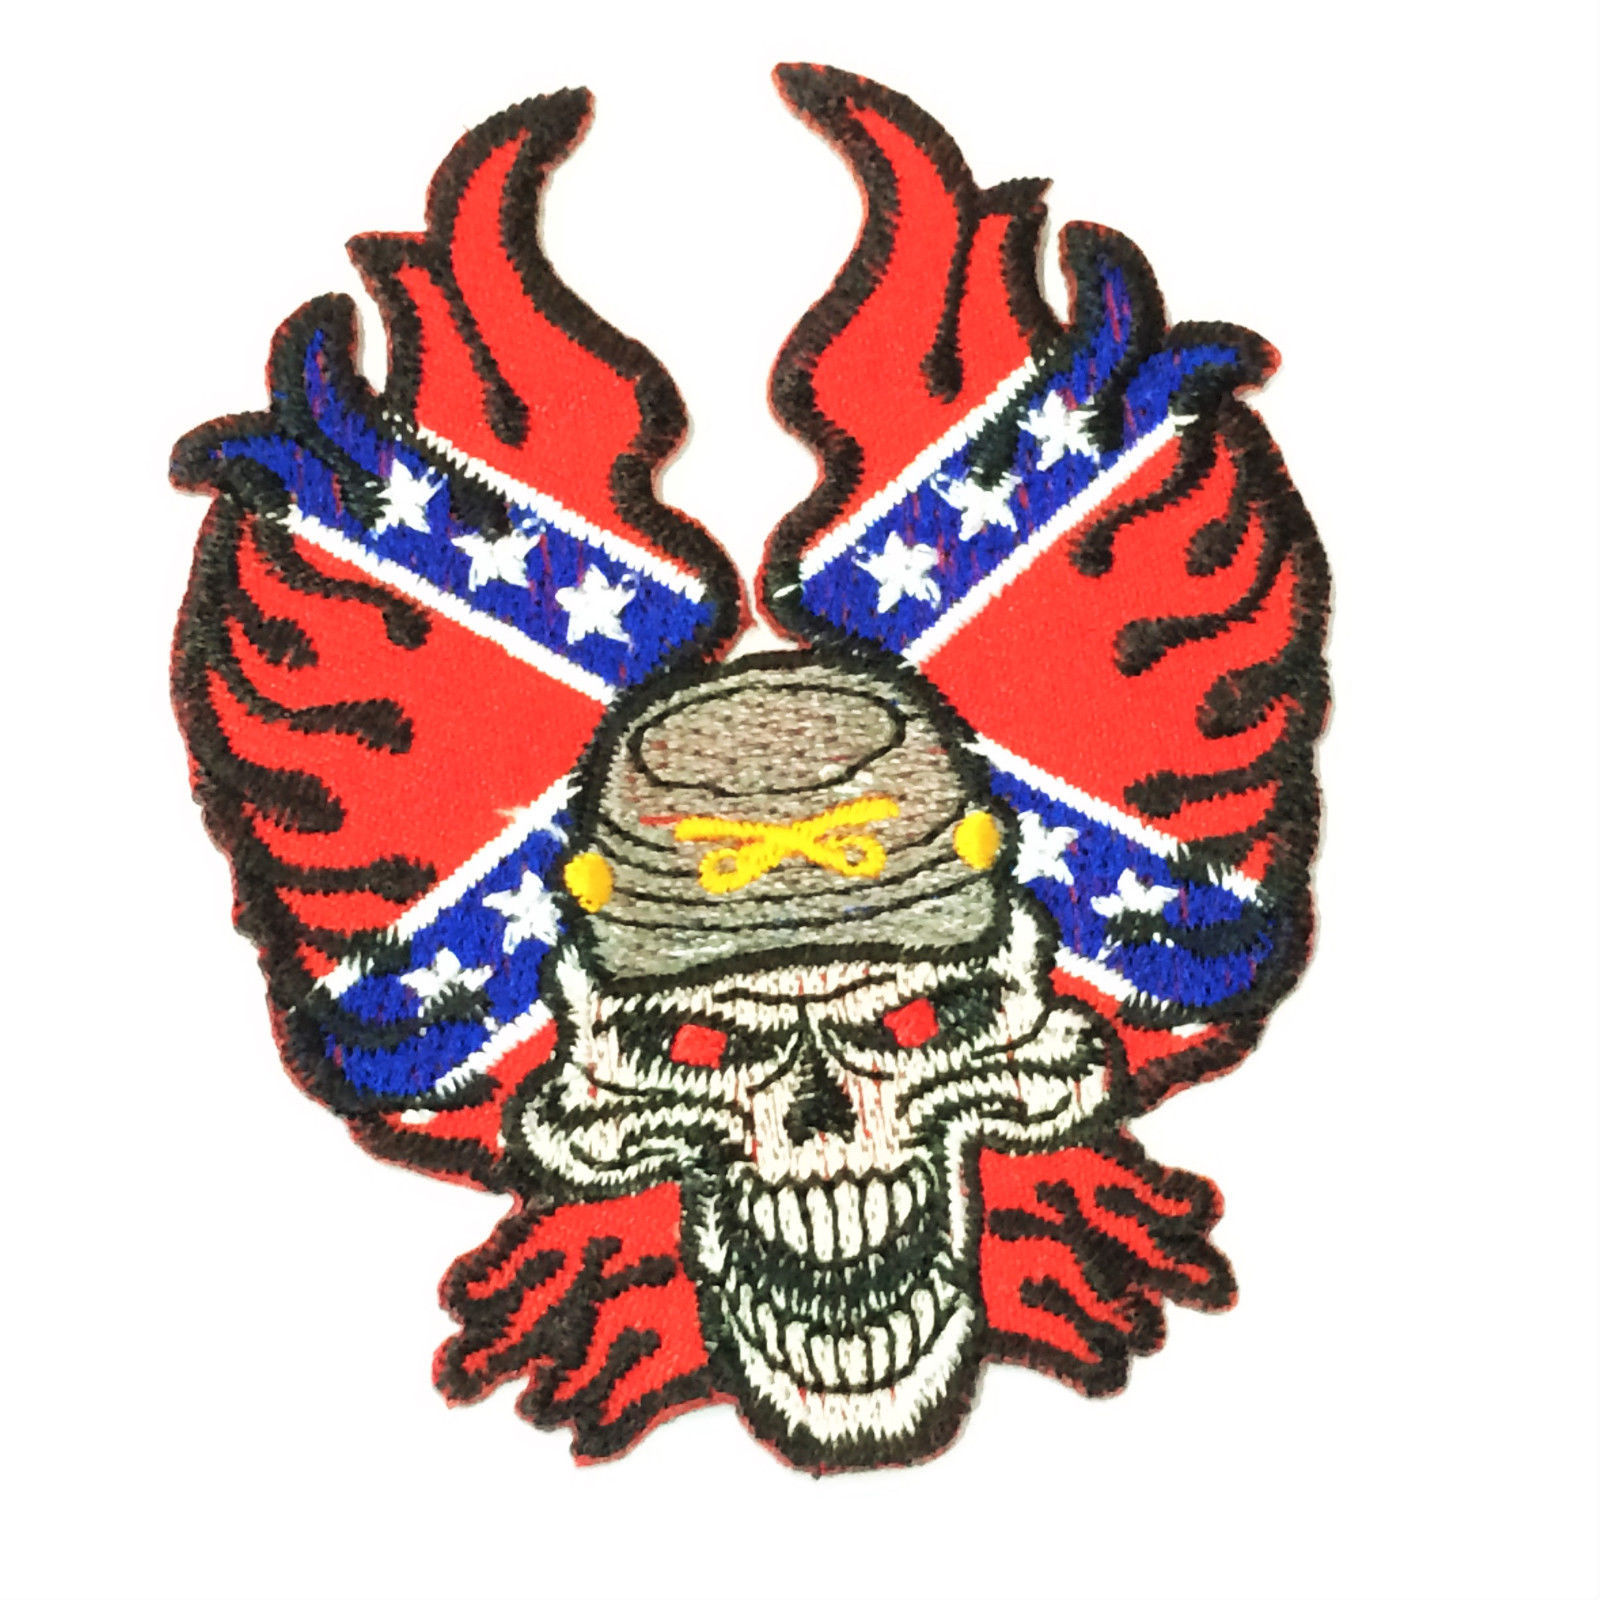 Two Skull Red Blue Embroidered Patch Biker Patch Motors Motorcycle Clothing